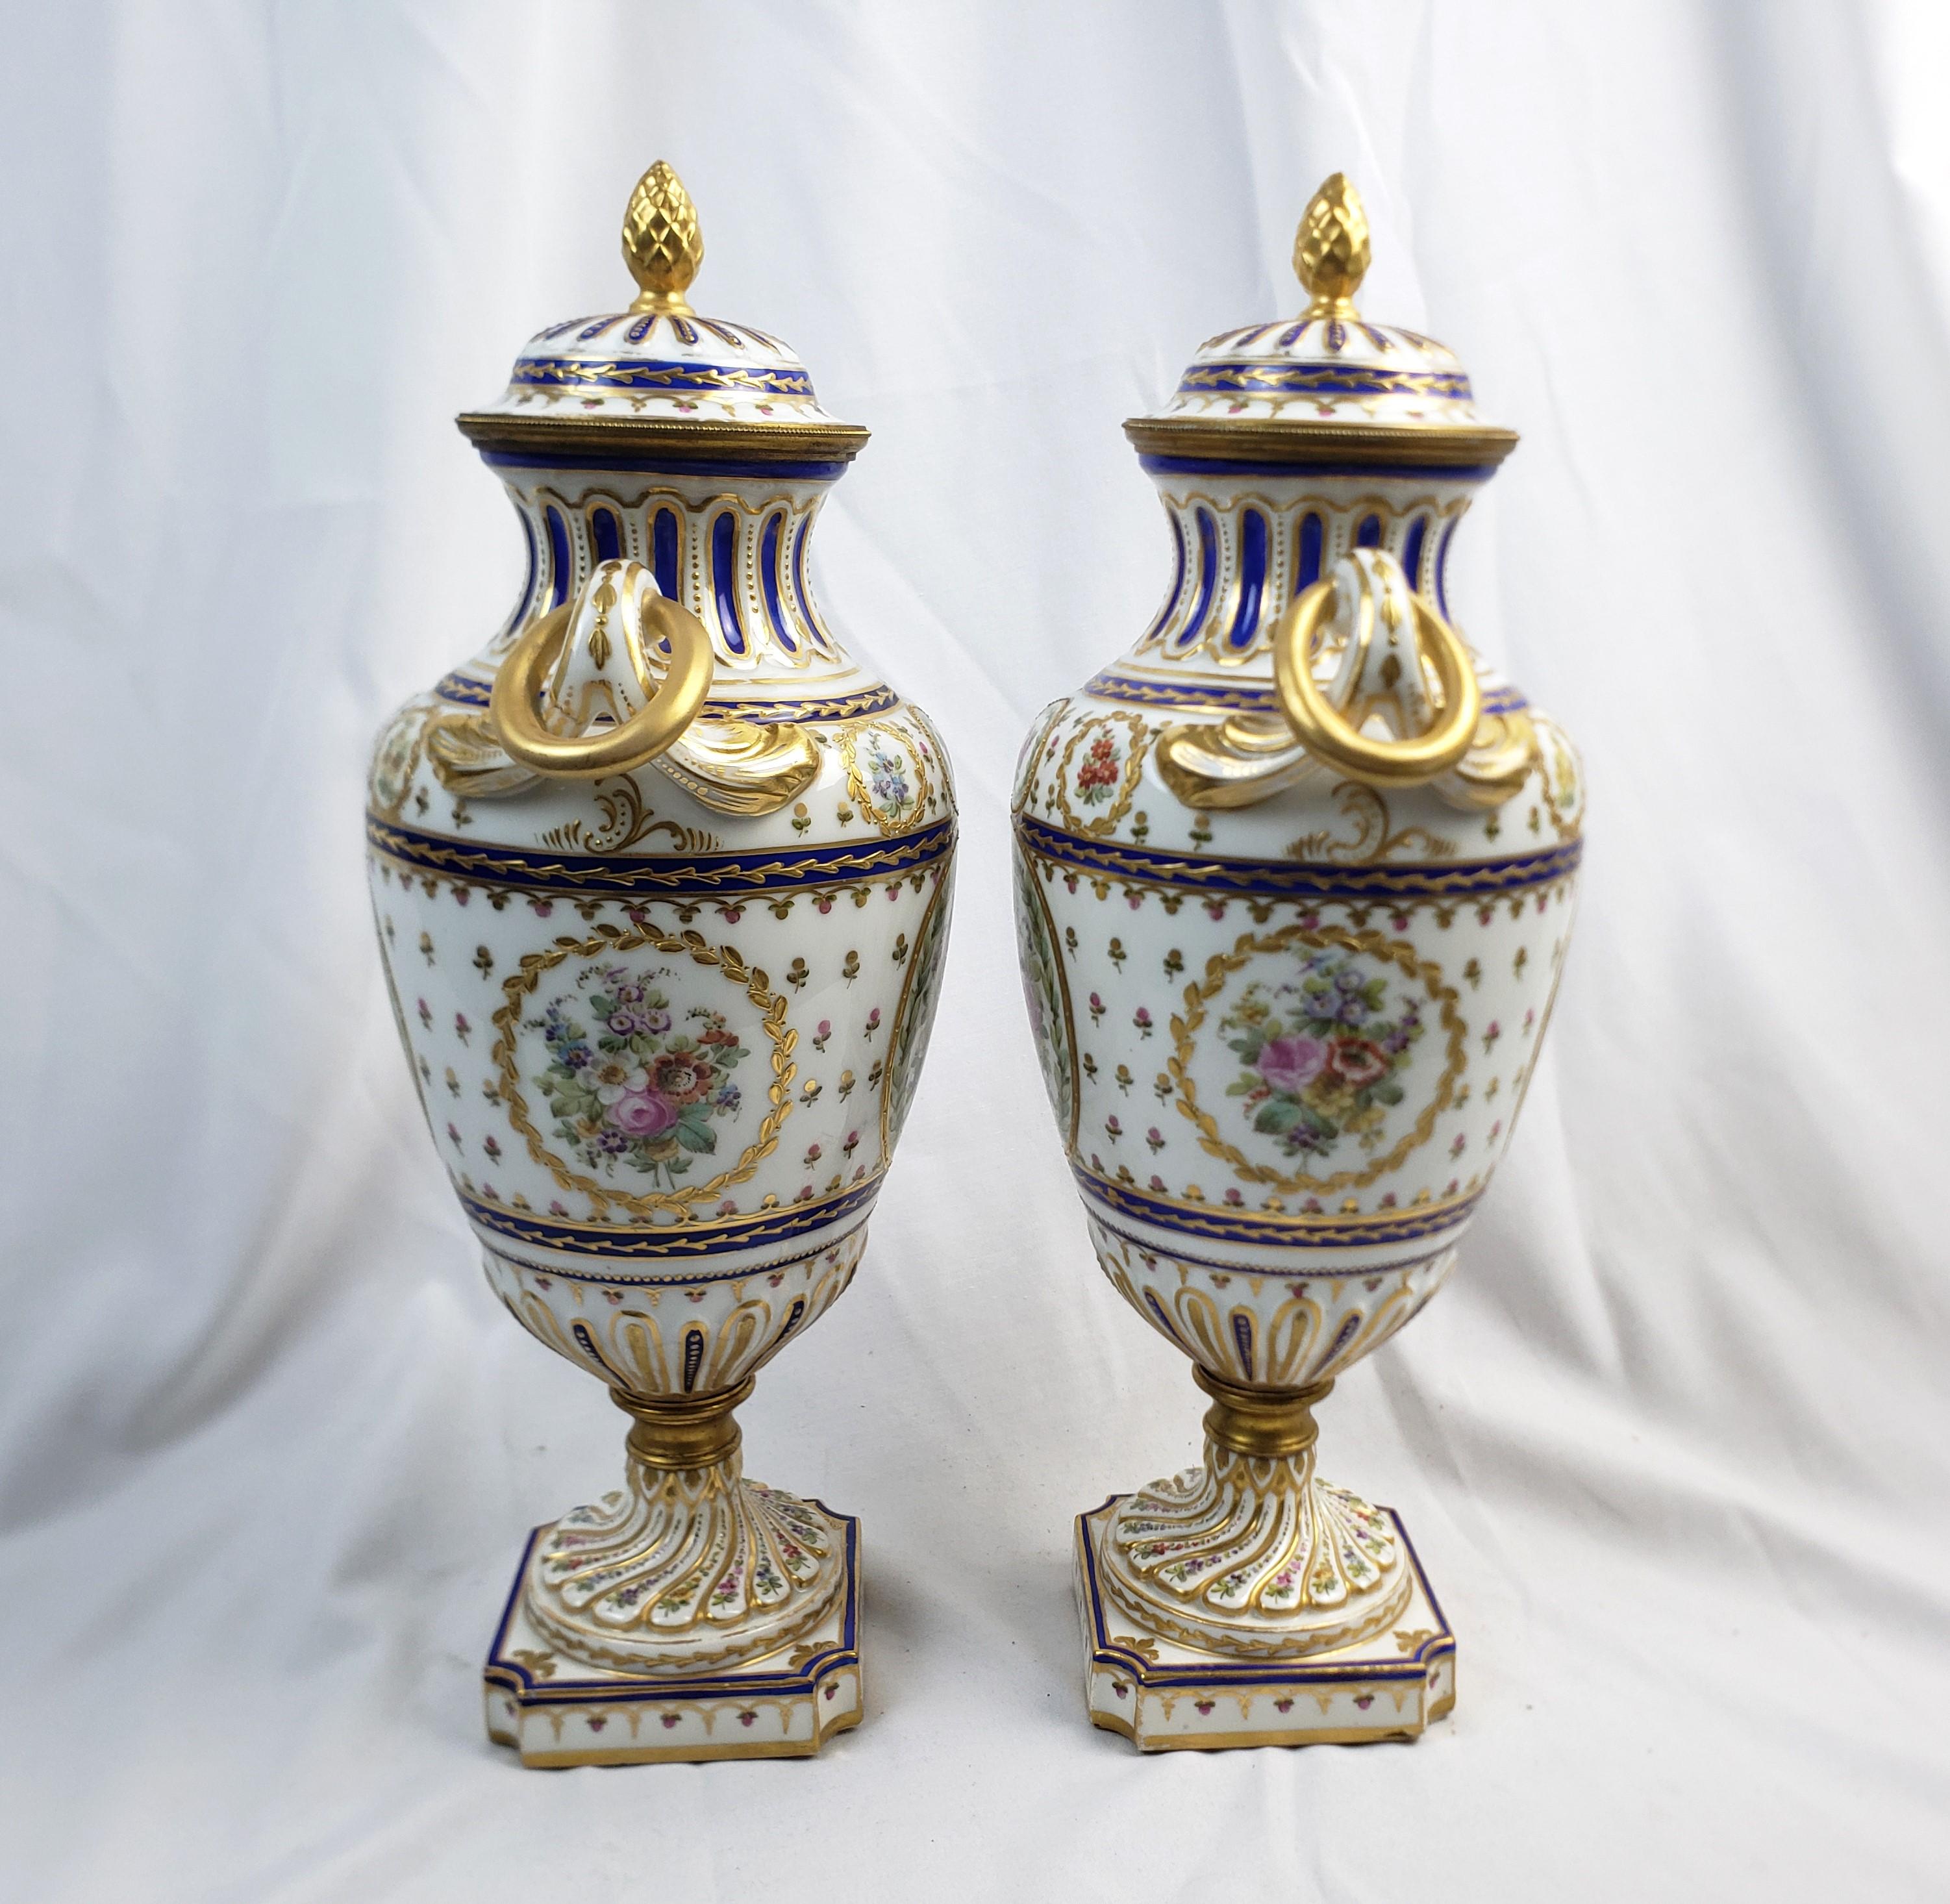 19th Century Pair of Antique Sevres Styled Covered Urns with Ornate Hand-Painted Decoration For Sale